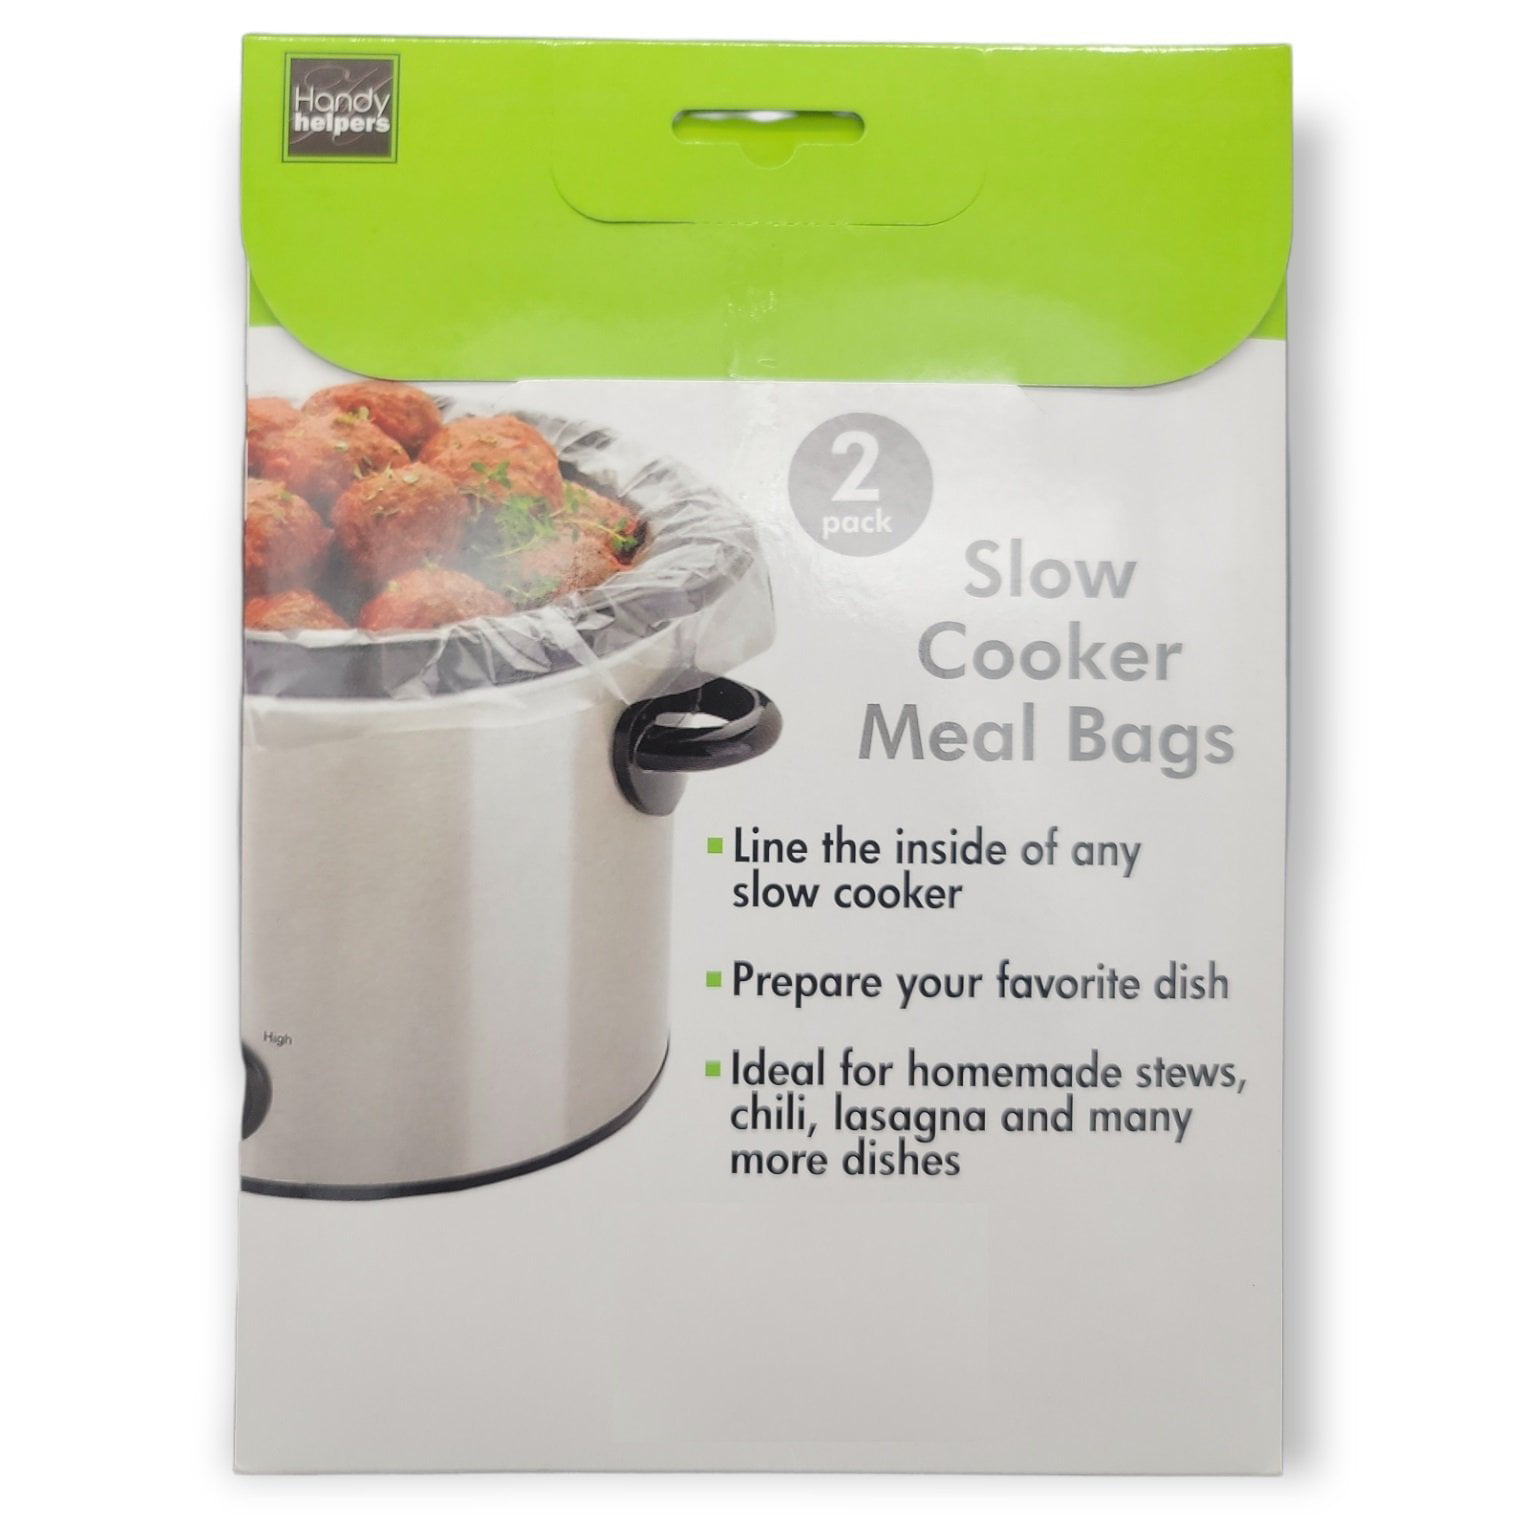  WRAPOK Slow Cooker Liners Kitchen Disposable Cooking Bags BPA  Free for Oval or Round Pot, Large Size 13 x 21 Inch, Fits 3 to 8.5 Quarts -  4 Pack (40 Bags Total): Home & Kitchen